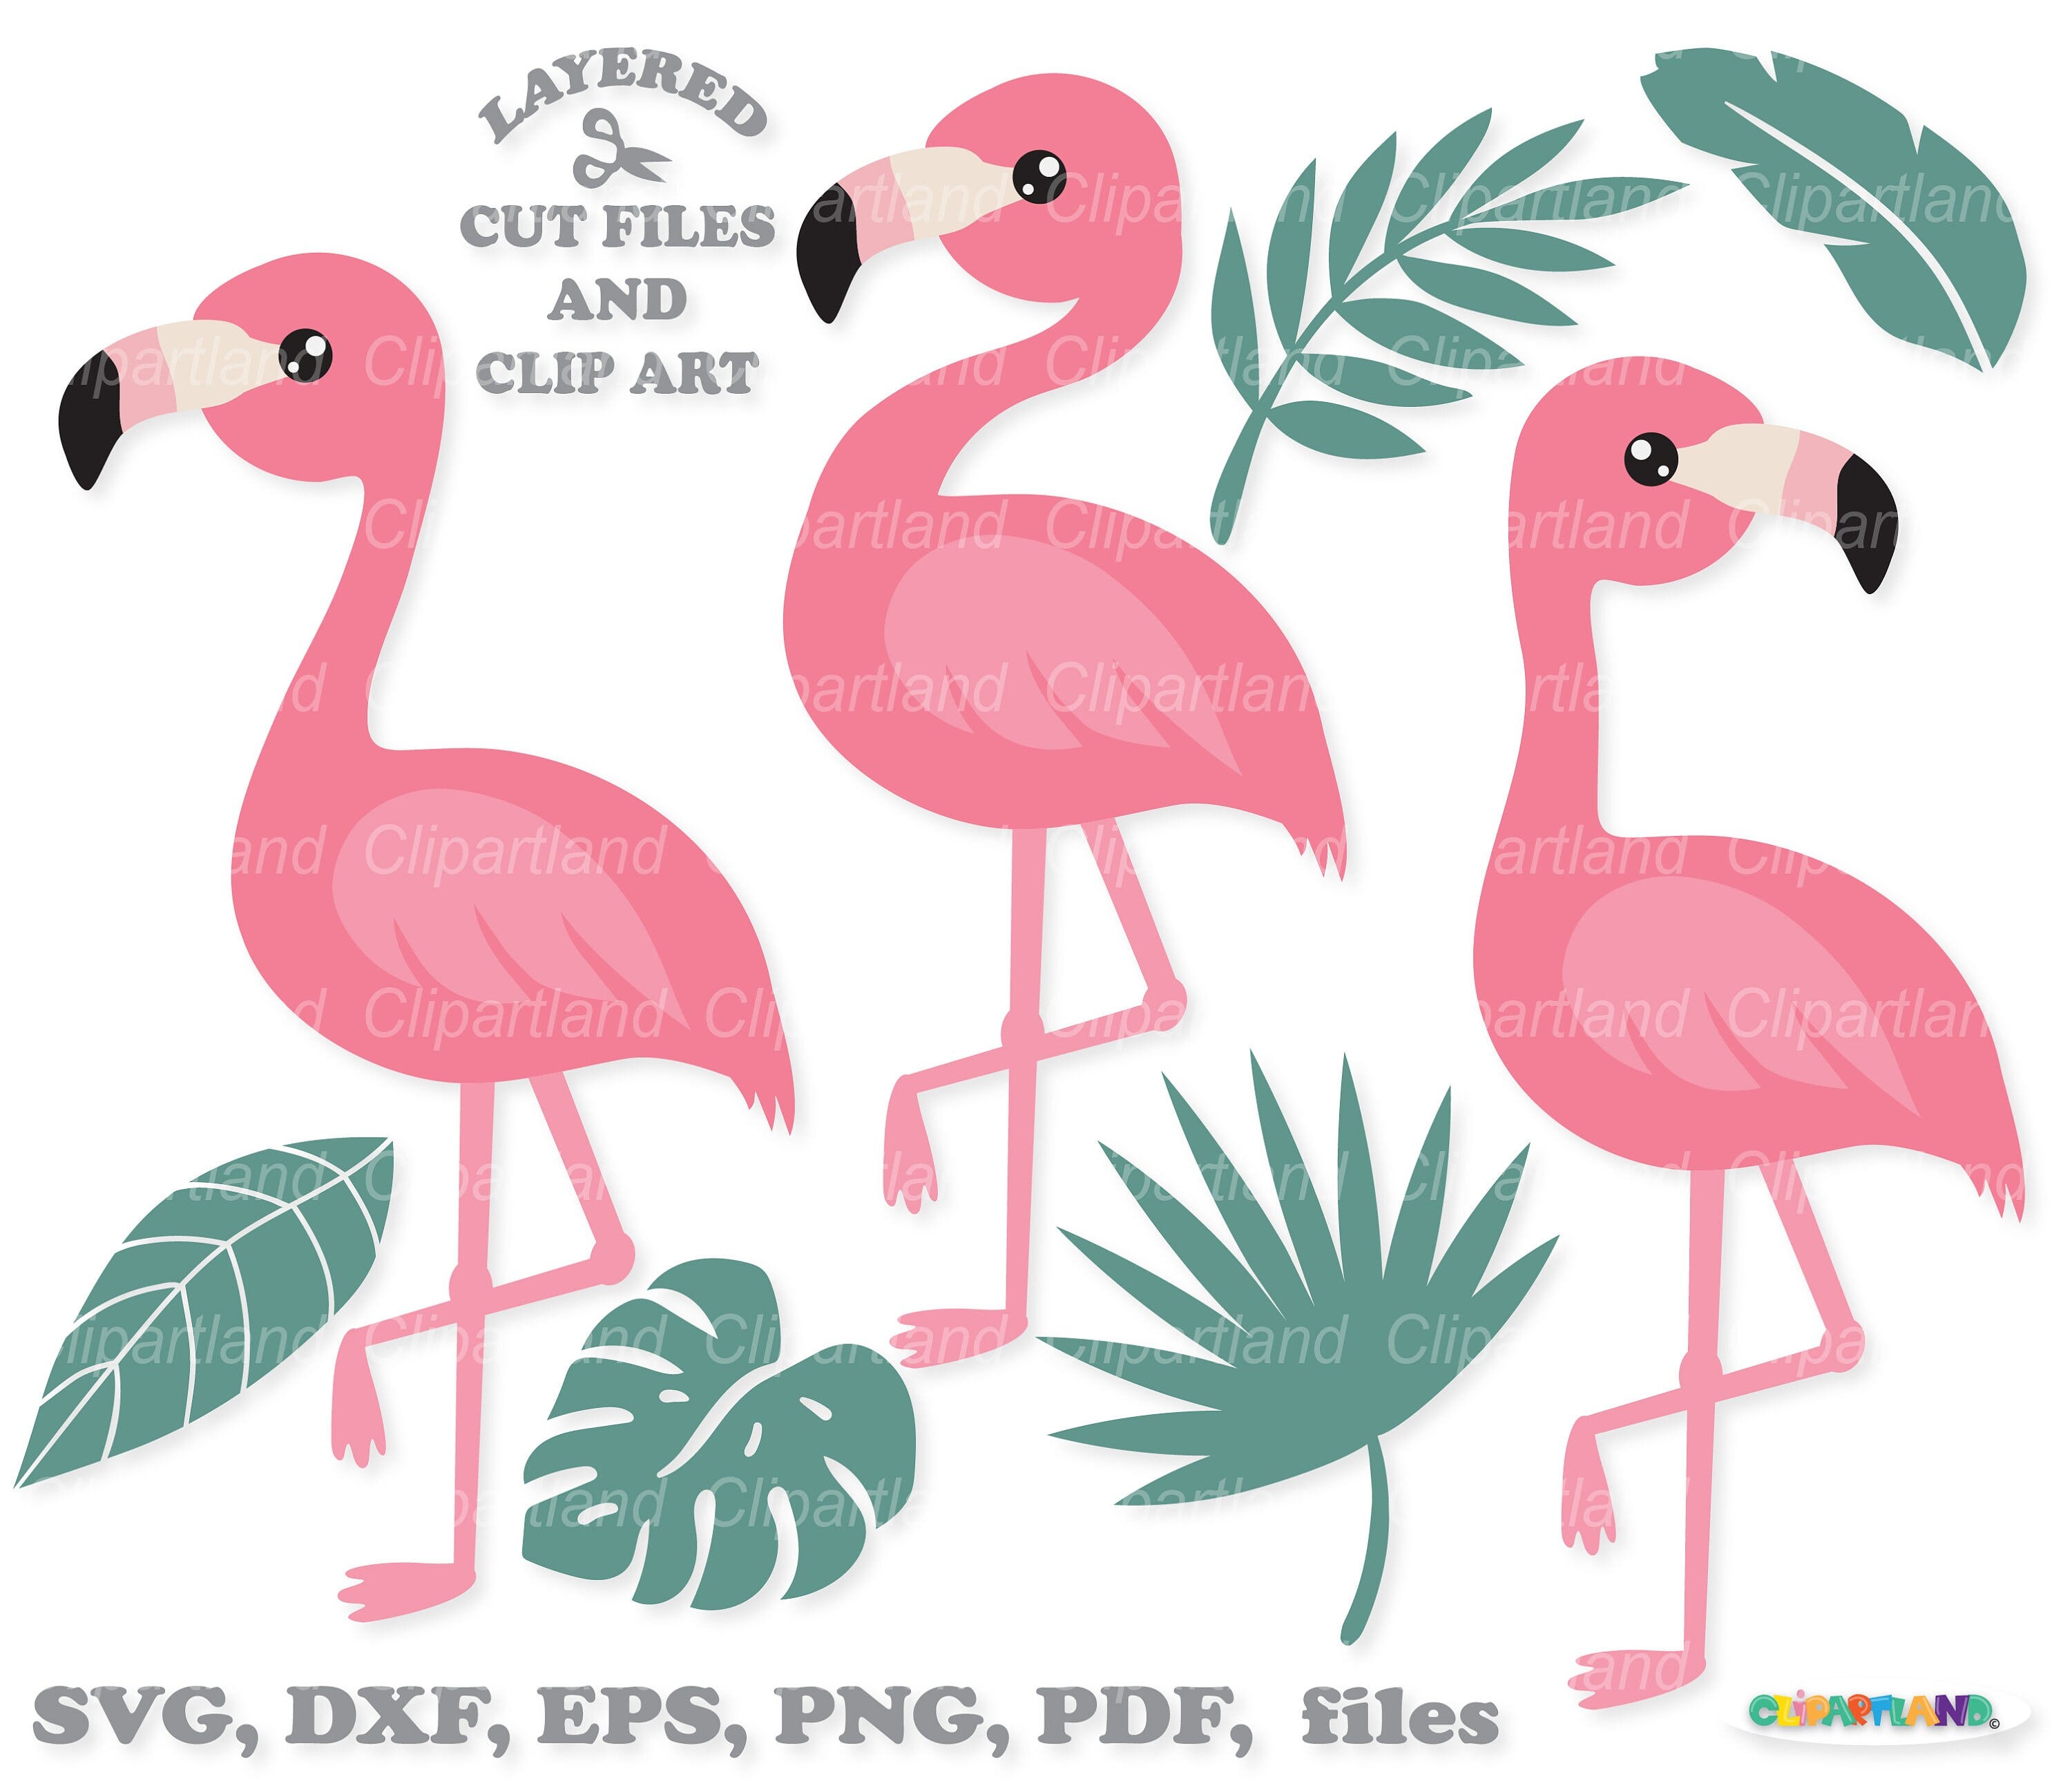 INSTANT Download. Cute flamingo bird svg cut file for Cricut, Silhouette and clip art. Commercial license is included! F_9.